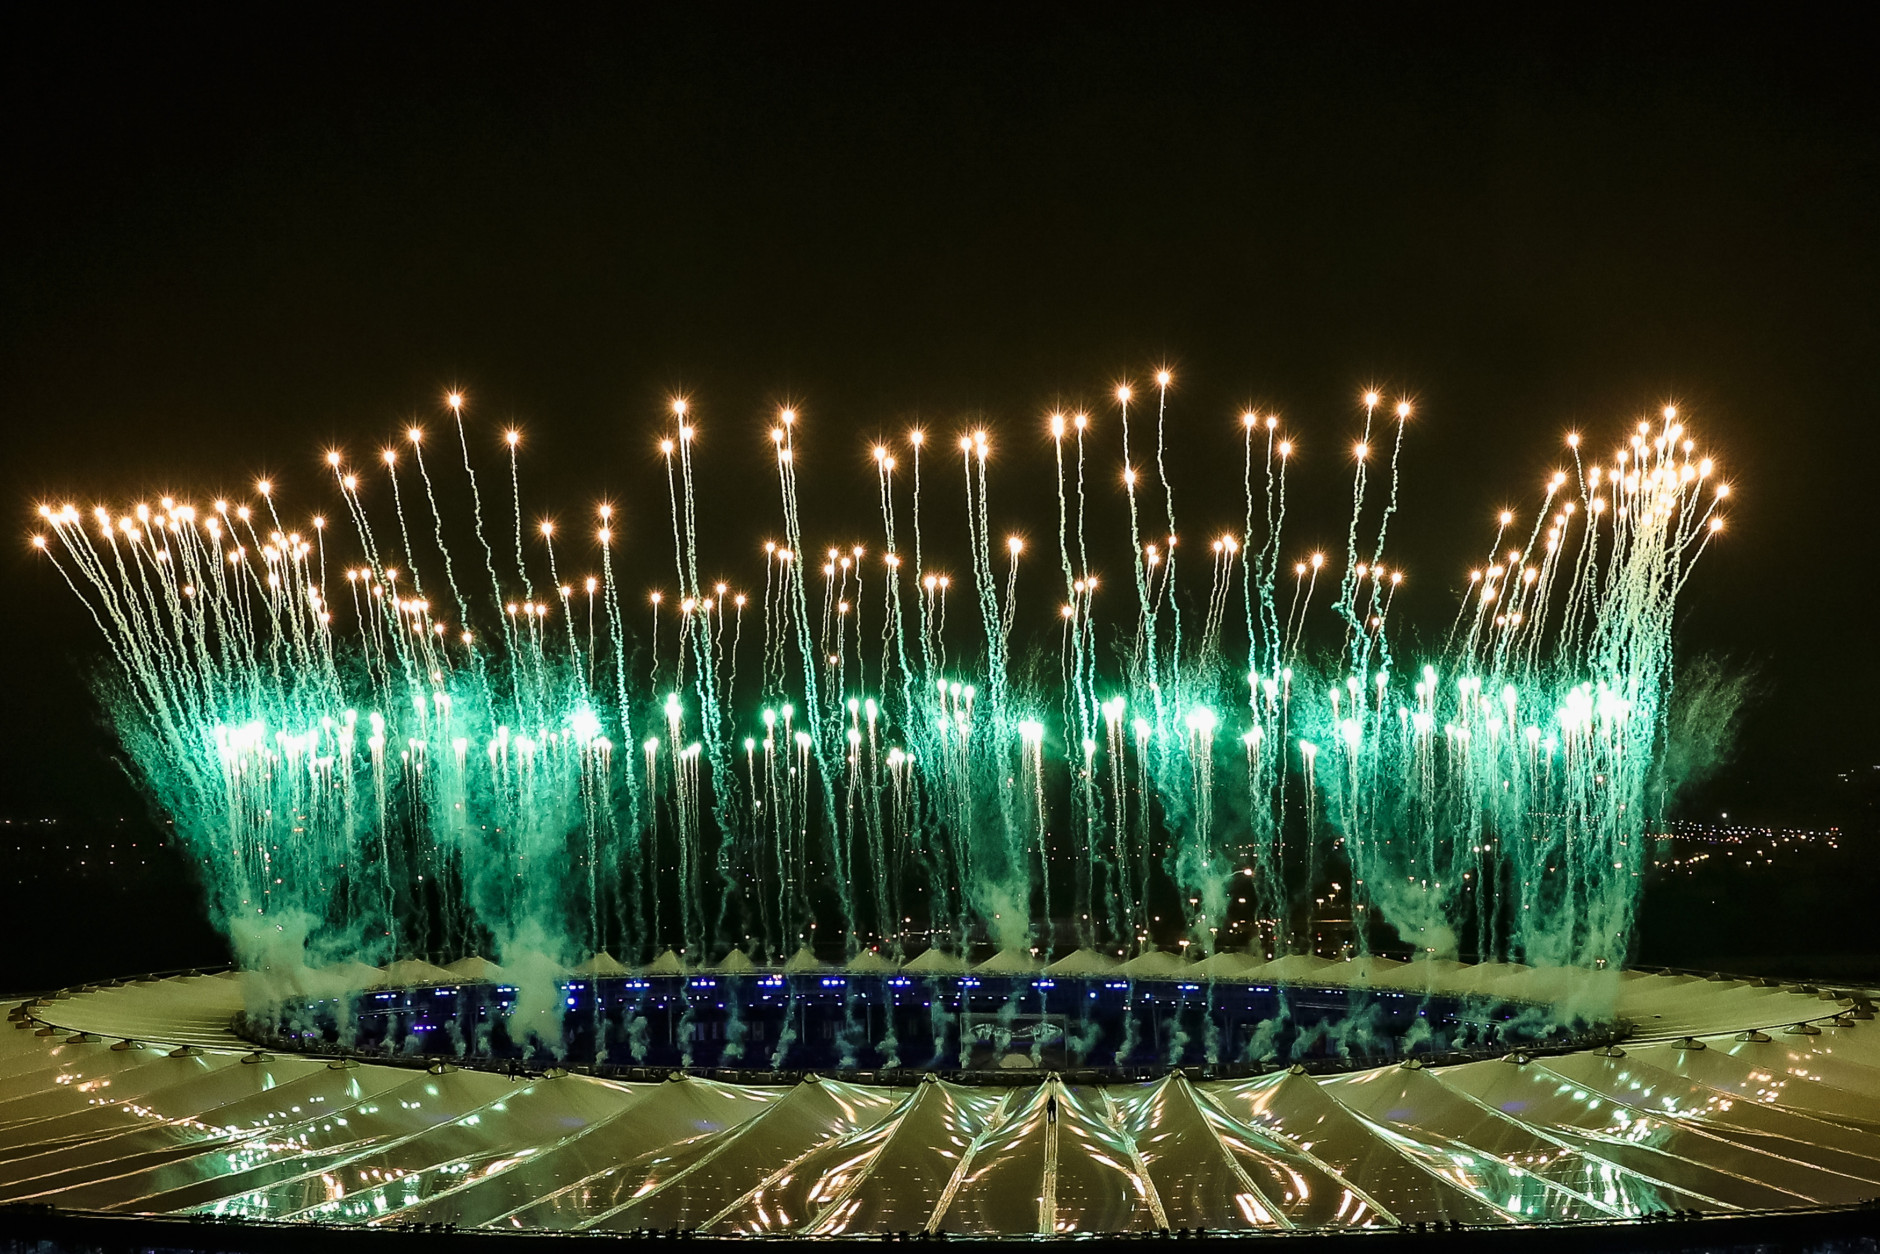 RIO DE JANEIRO, BRAZIL - AUGUST 21:  Fireworks explode during the Closing Ceremony 2016 Olympic Games at Maracana Stadium on August 21, 2016 in Rio de Janeiro, Brazil.  (Photo by Buda Mendes/Getty Images)